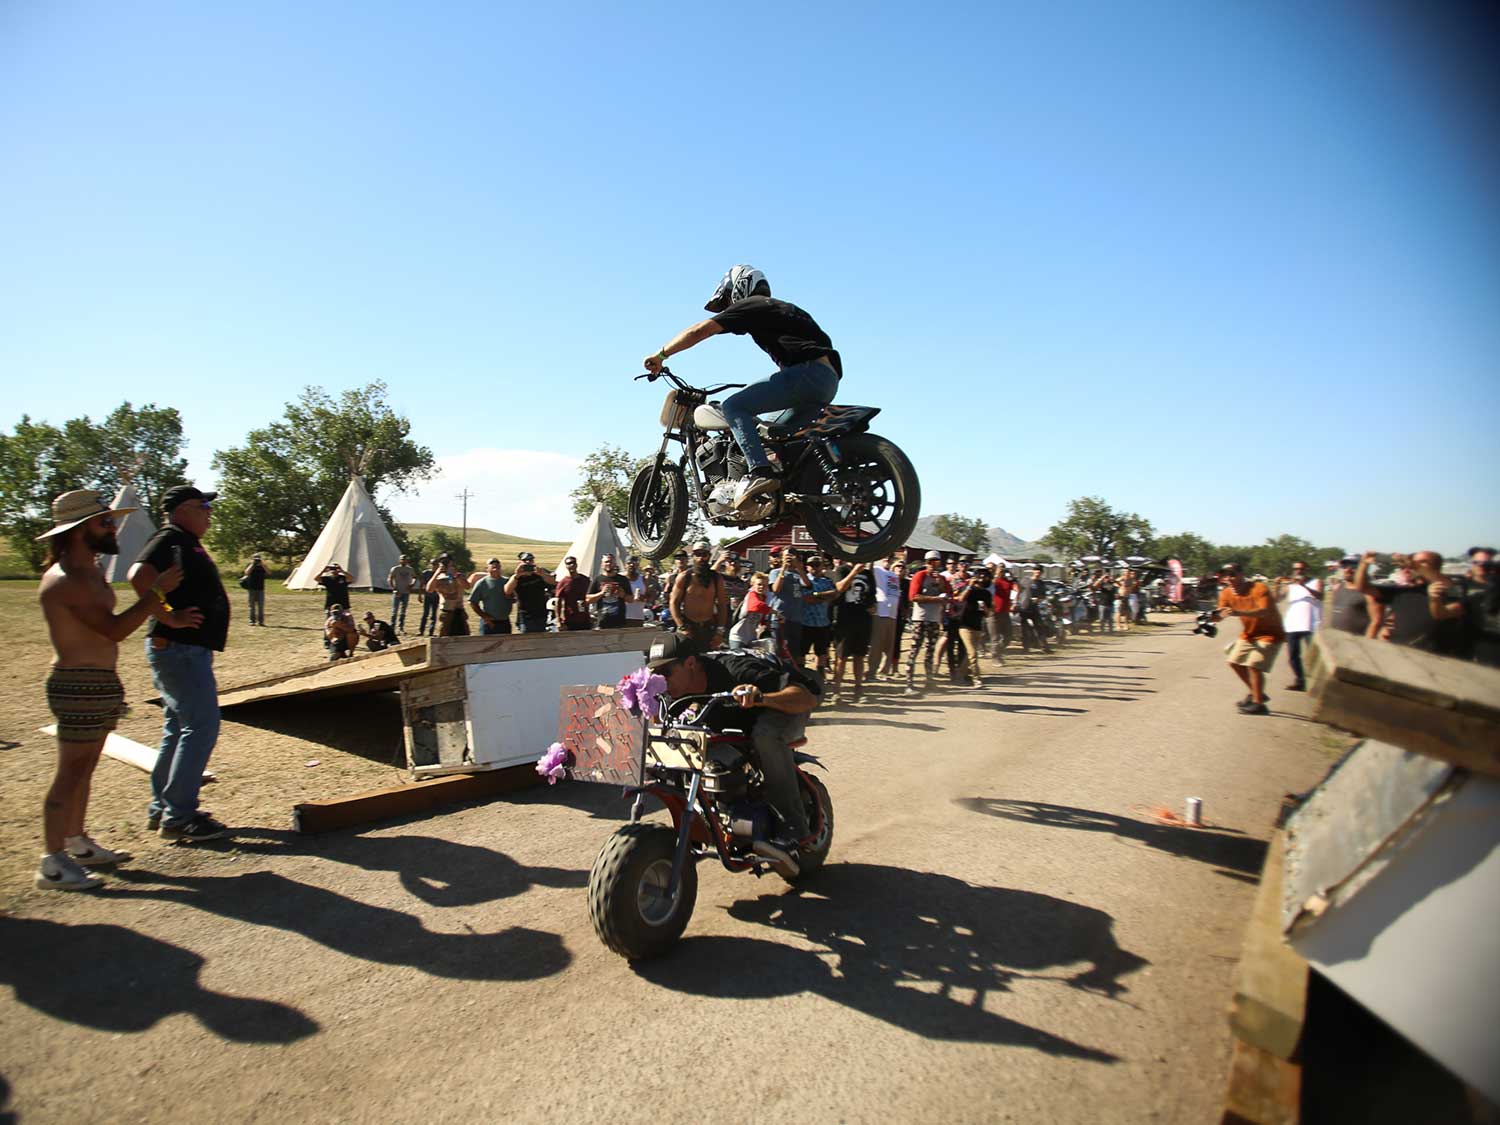 Sportster jumps over a rider on a minibike at Sturgis 2020